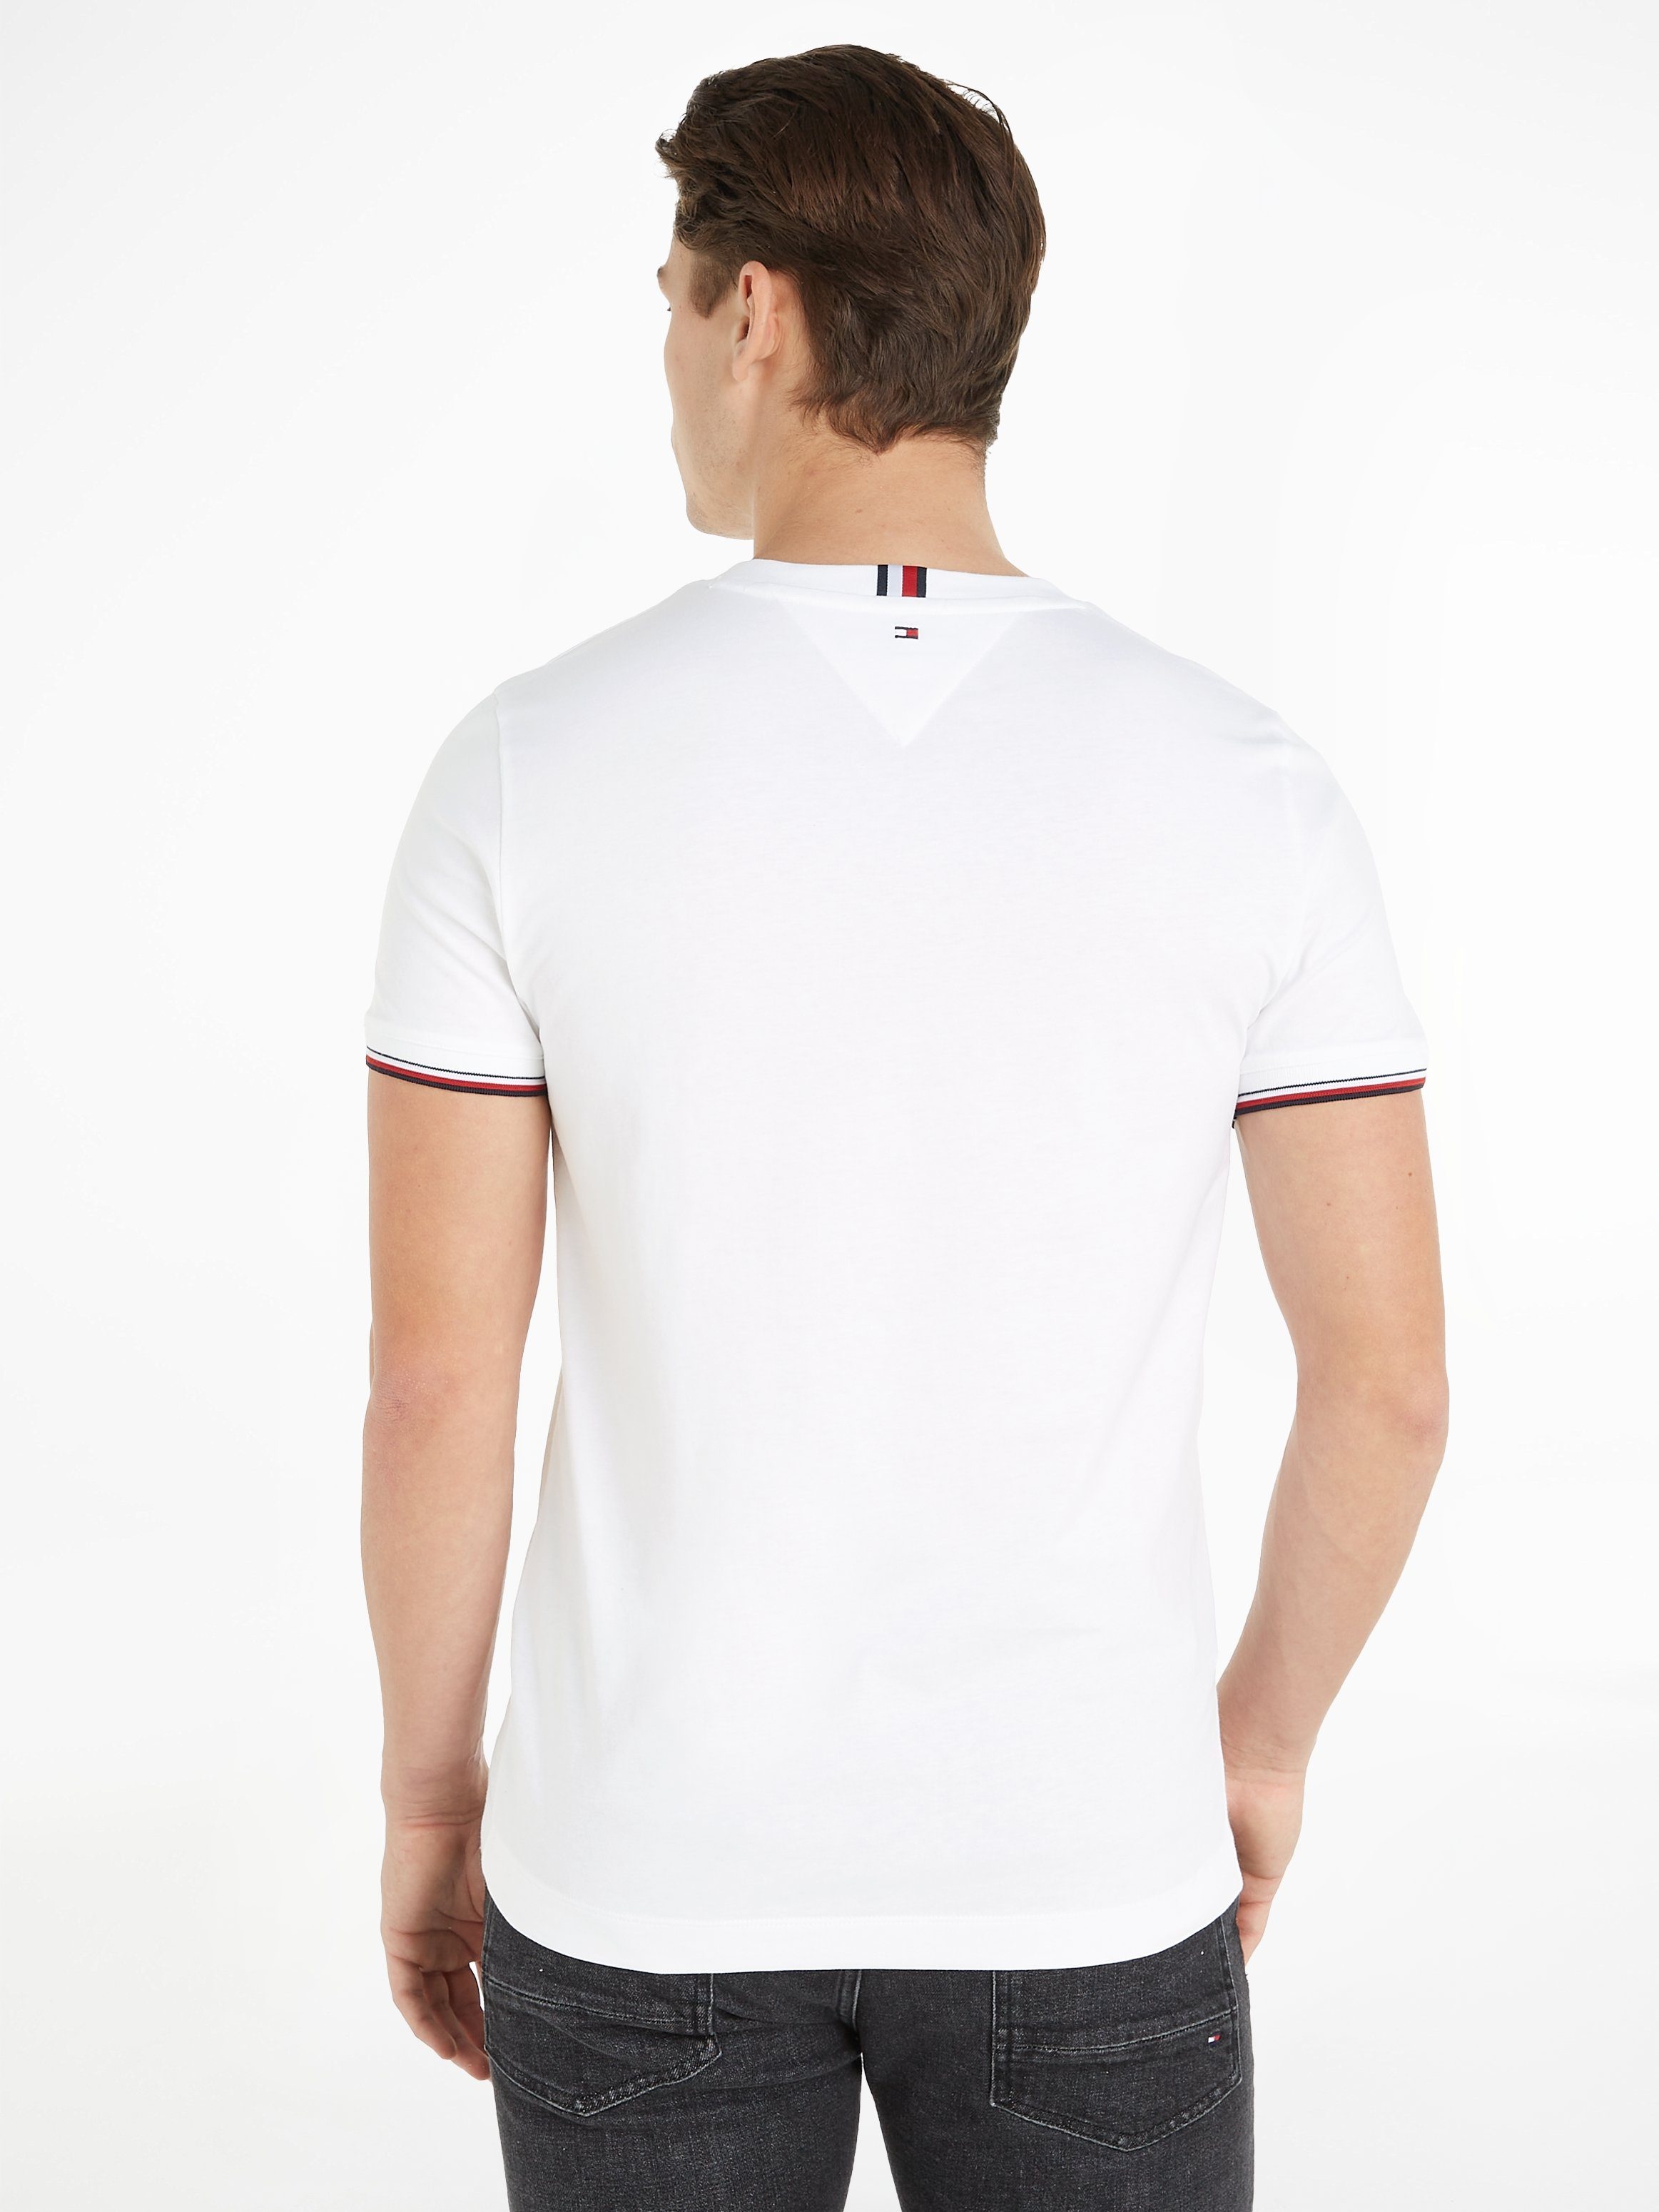 Tommy Hilfiger T-Shirt TOMMY TIPPED White TEE LOGO